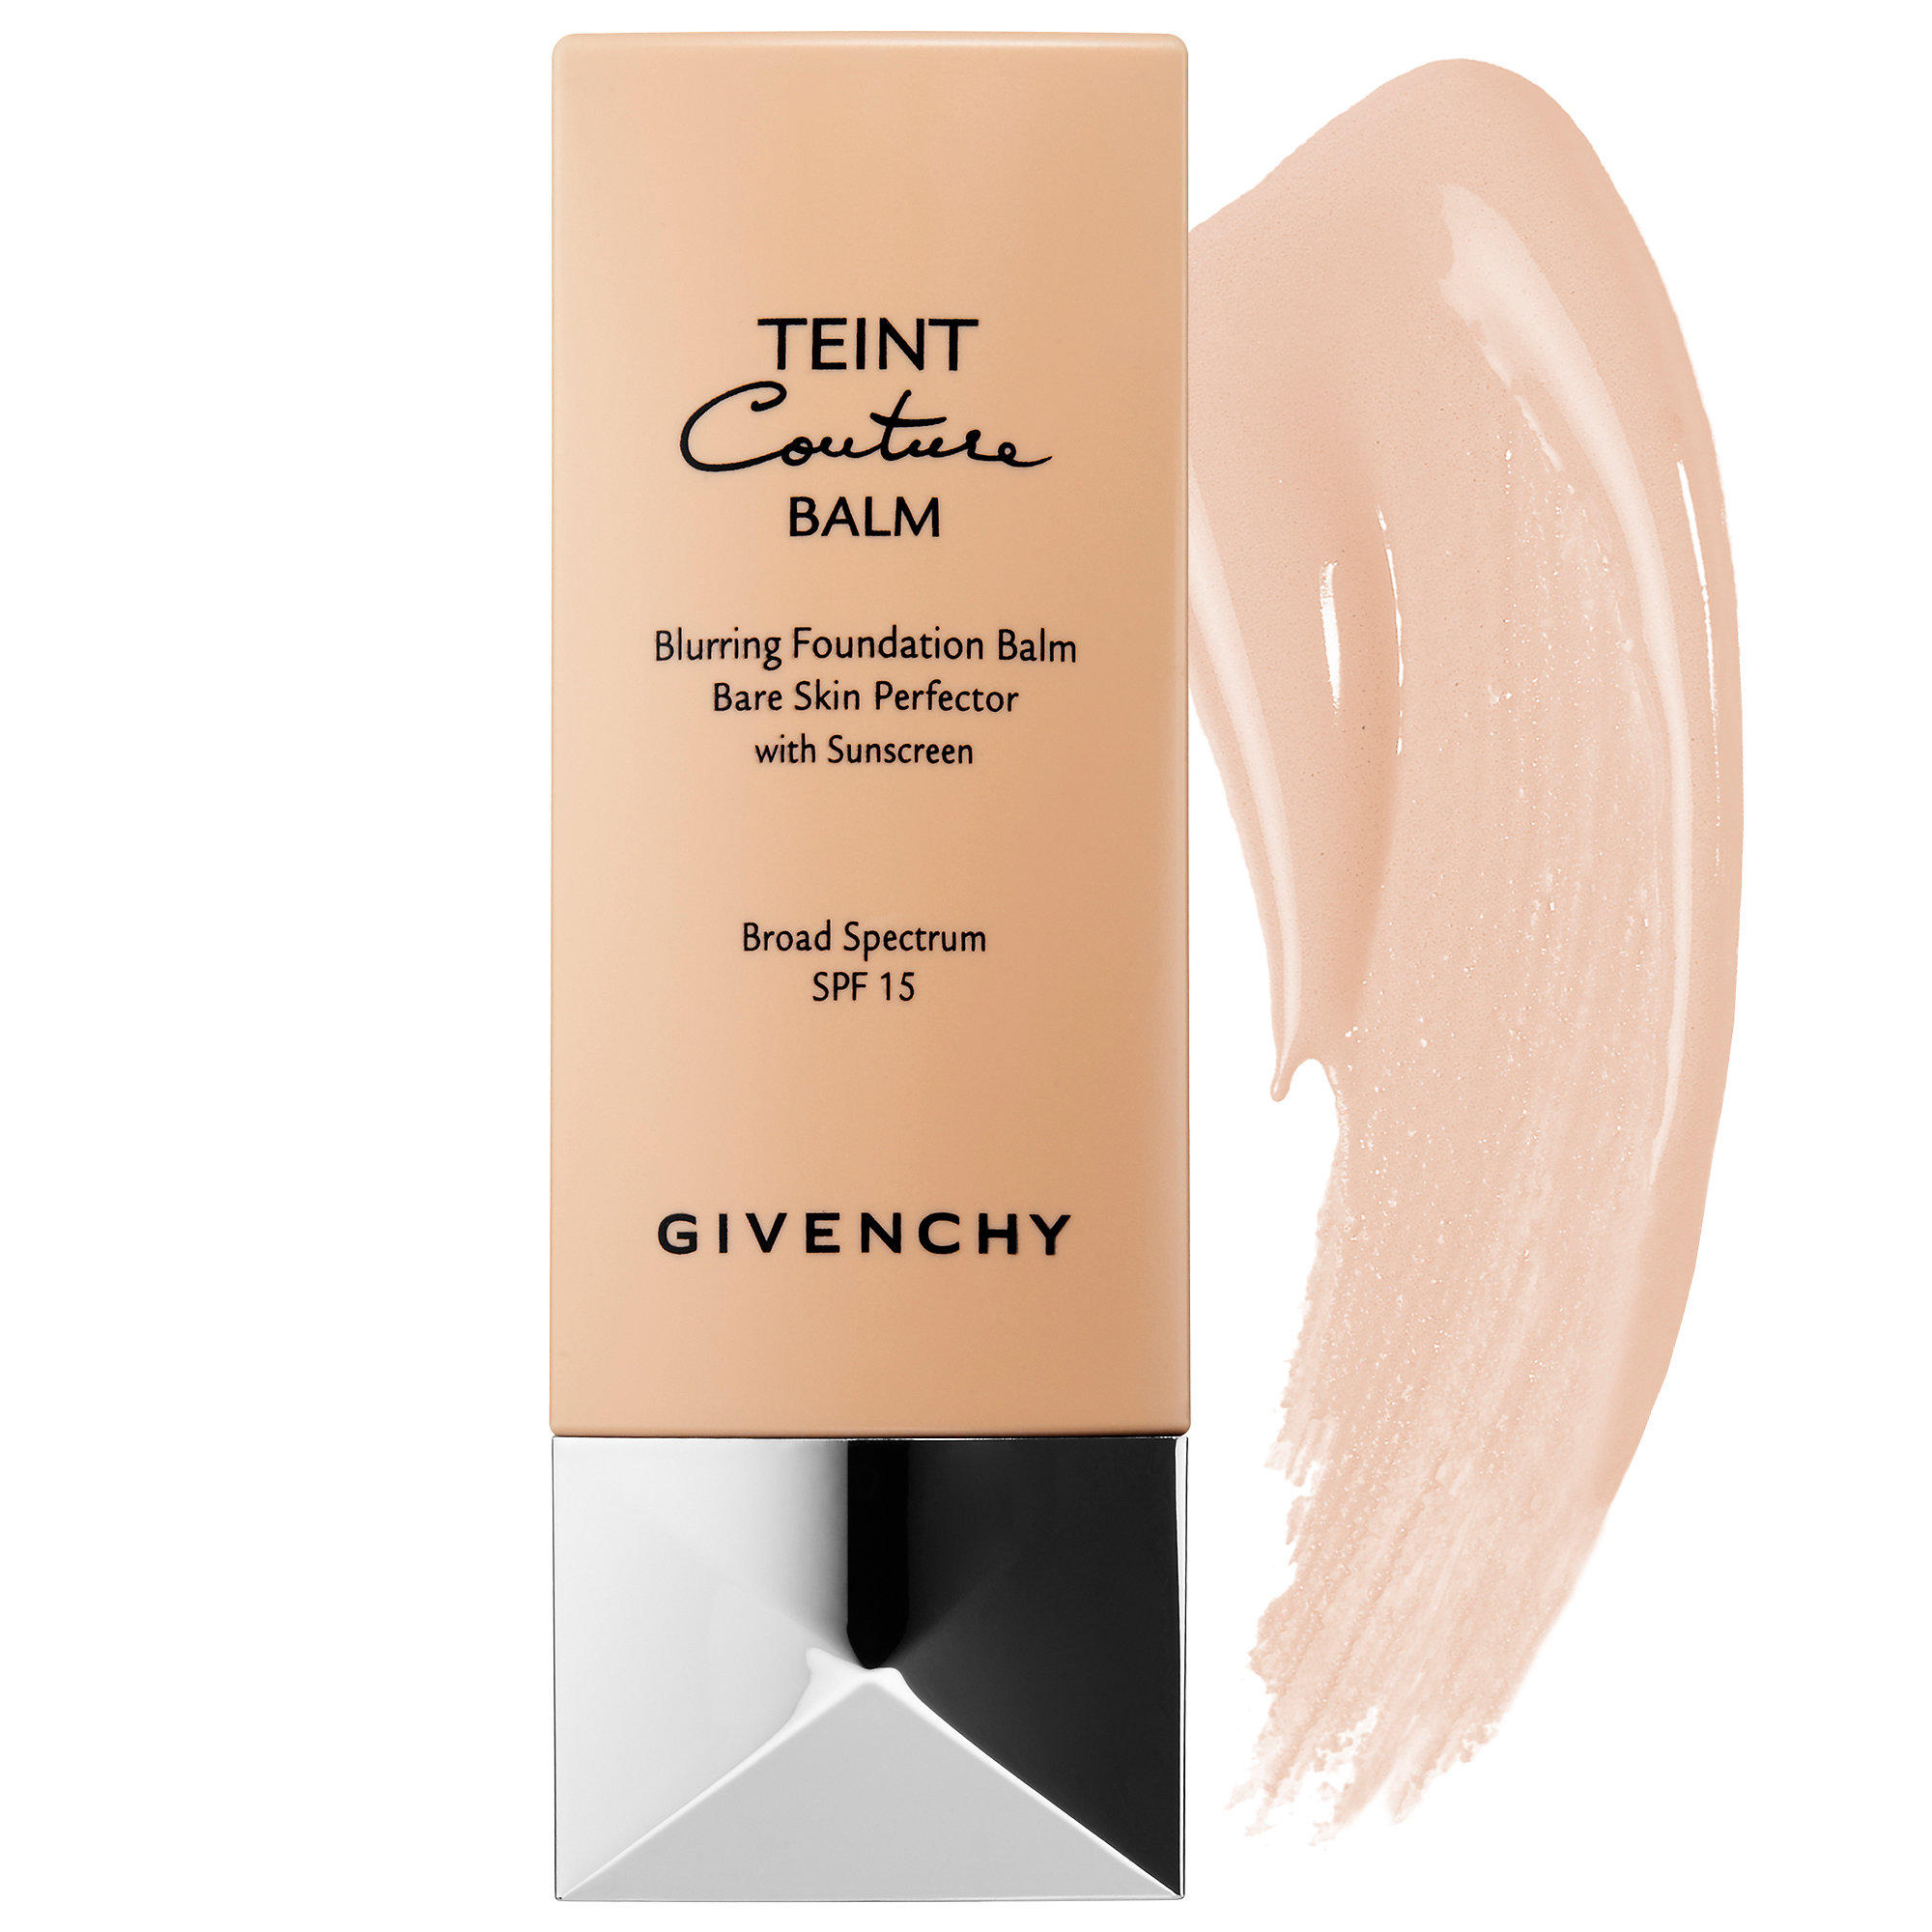 Givenchy Teint Couture Balm Blurring Foundation Nude Sand 3